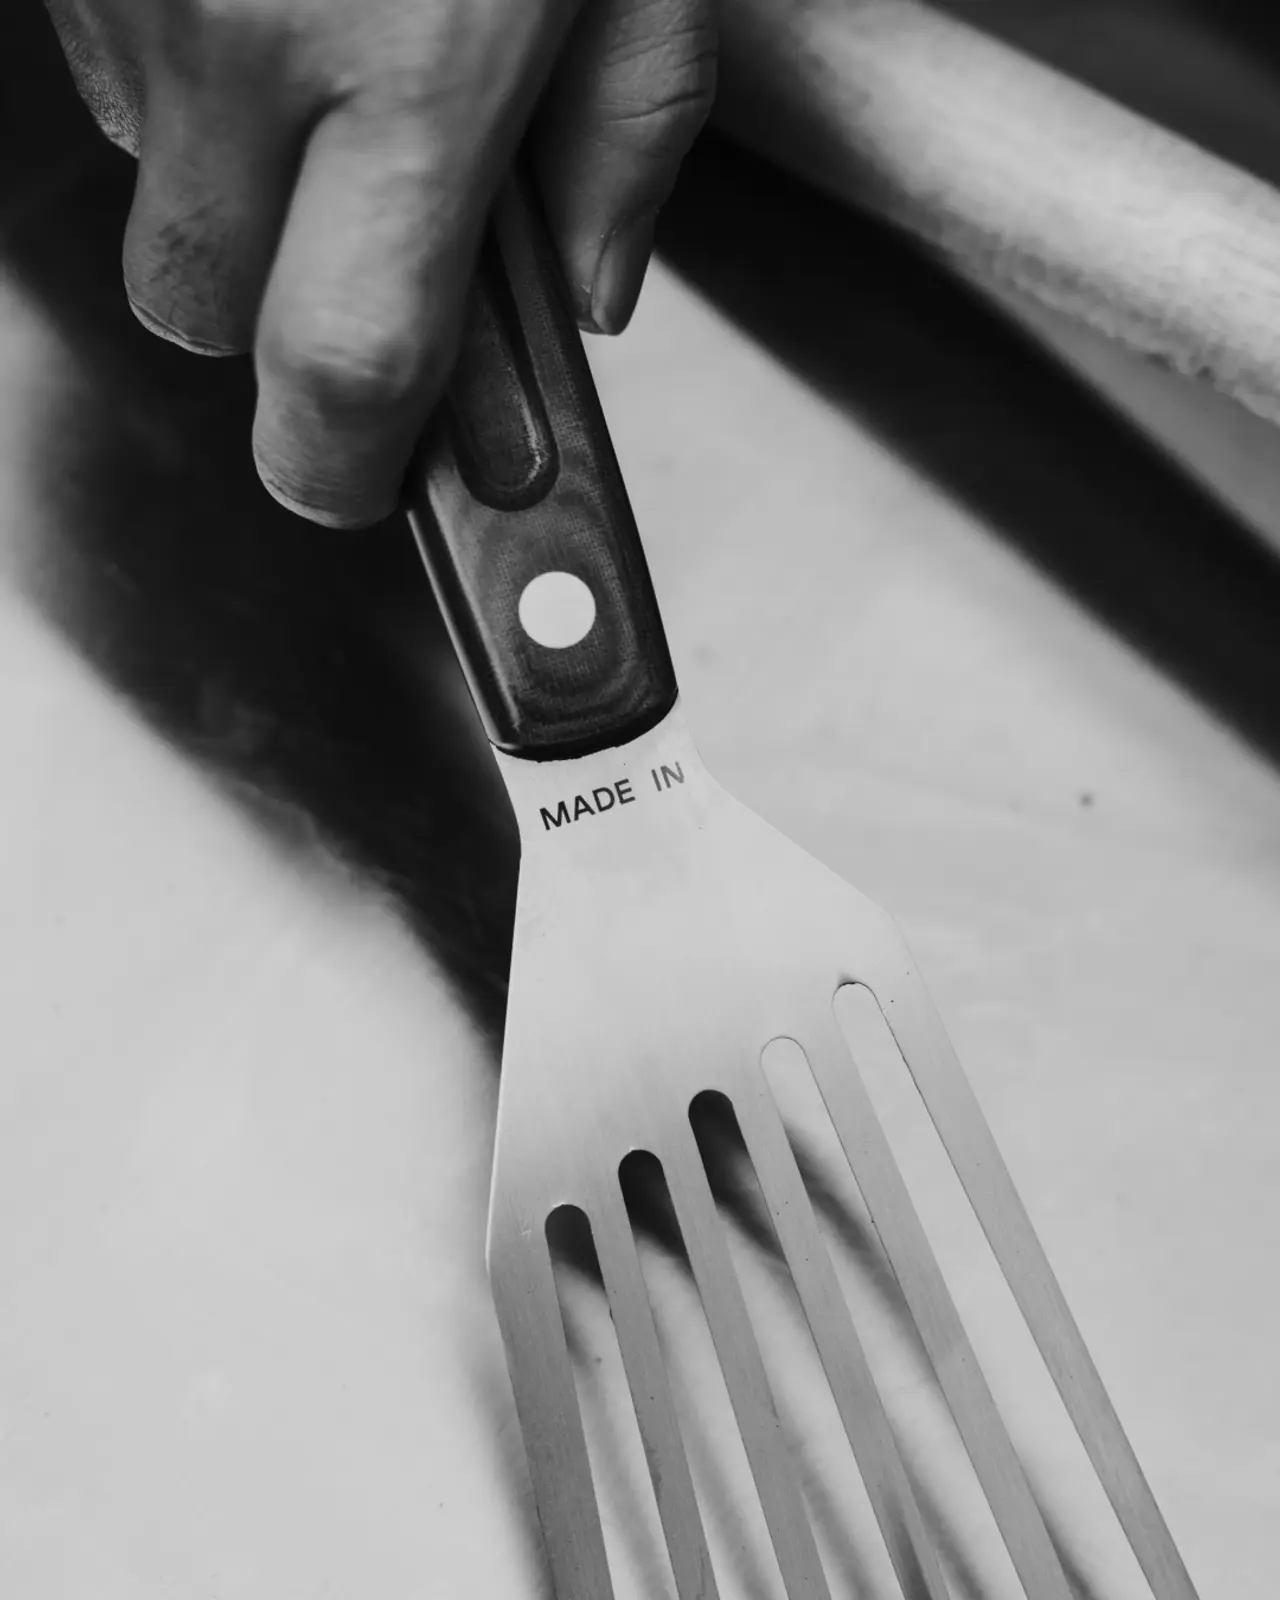 A person's hand grips a large stainless steel fork with "MADE IN" text imprinted on the handle, set against a blurred background.